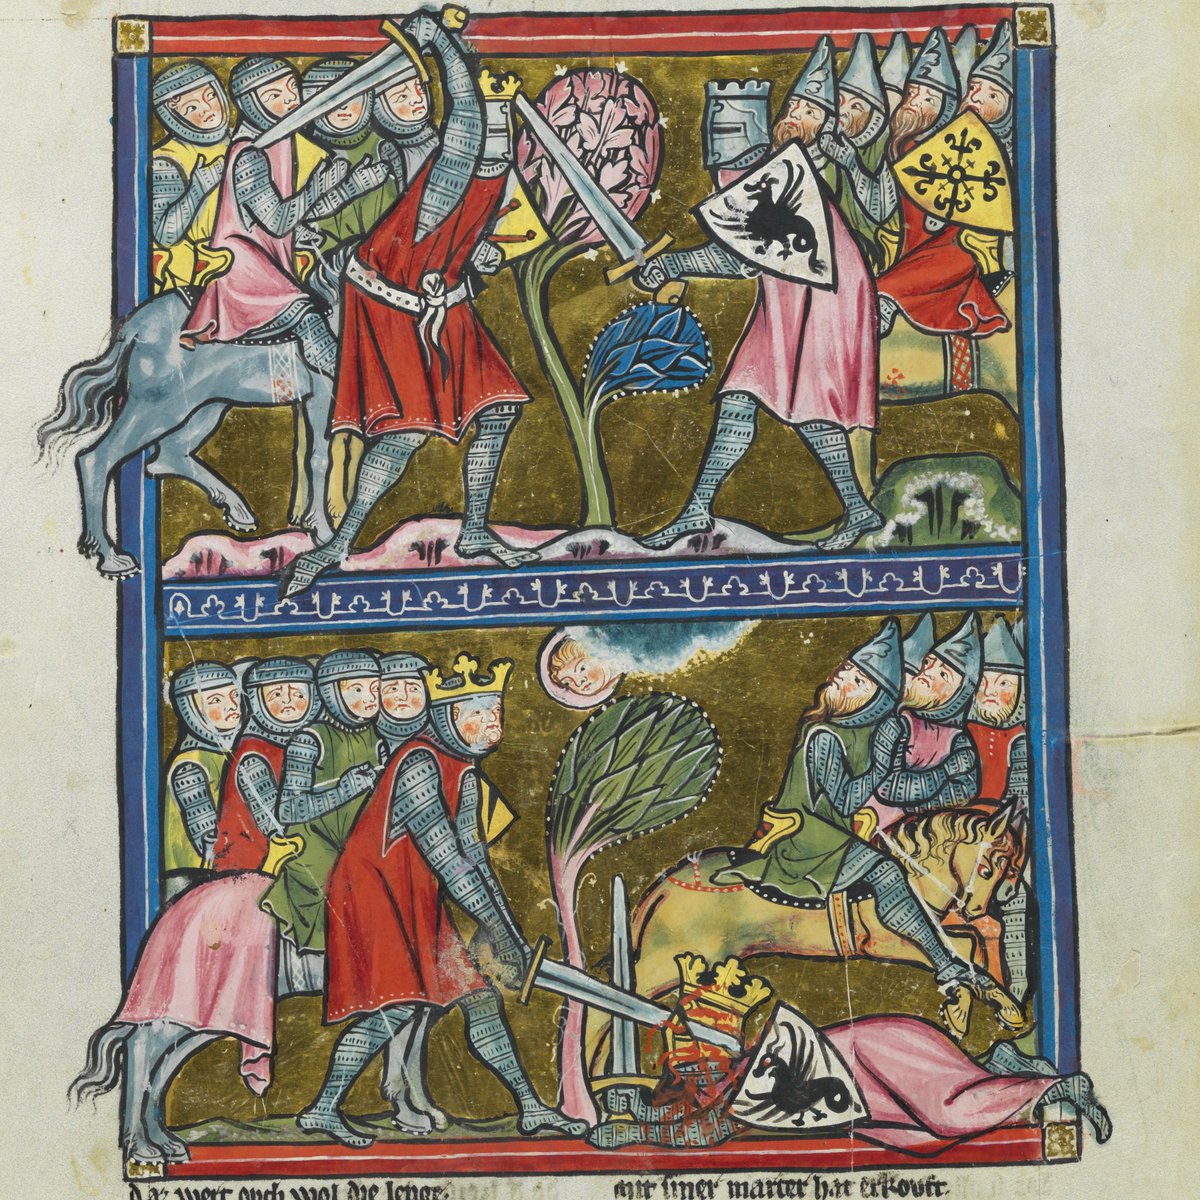 And knights on horse would also dress their horses in pink for battle! Nobody wants a dour battlefield. They're not monks!(St. Gallen, Kantonsbibliothek, VadSlg Ms. 302, f. 66r)